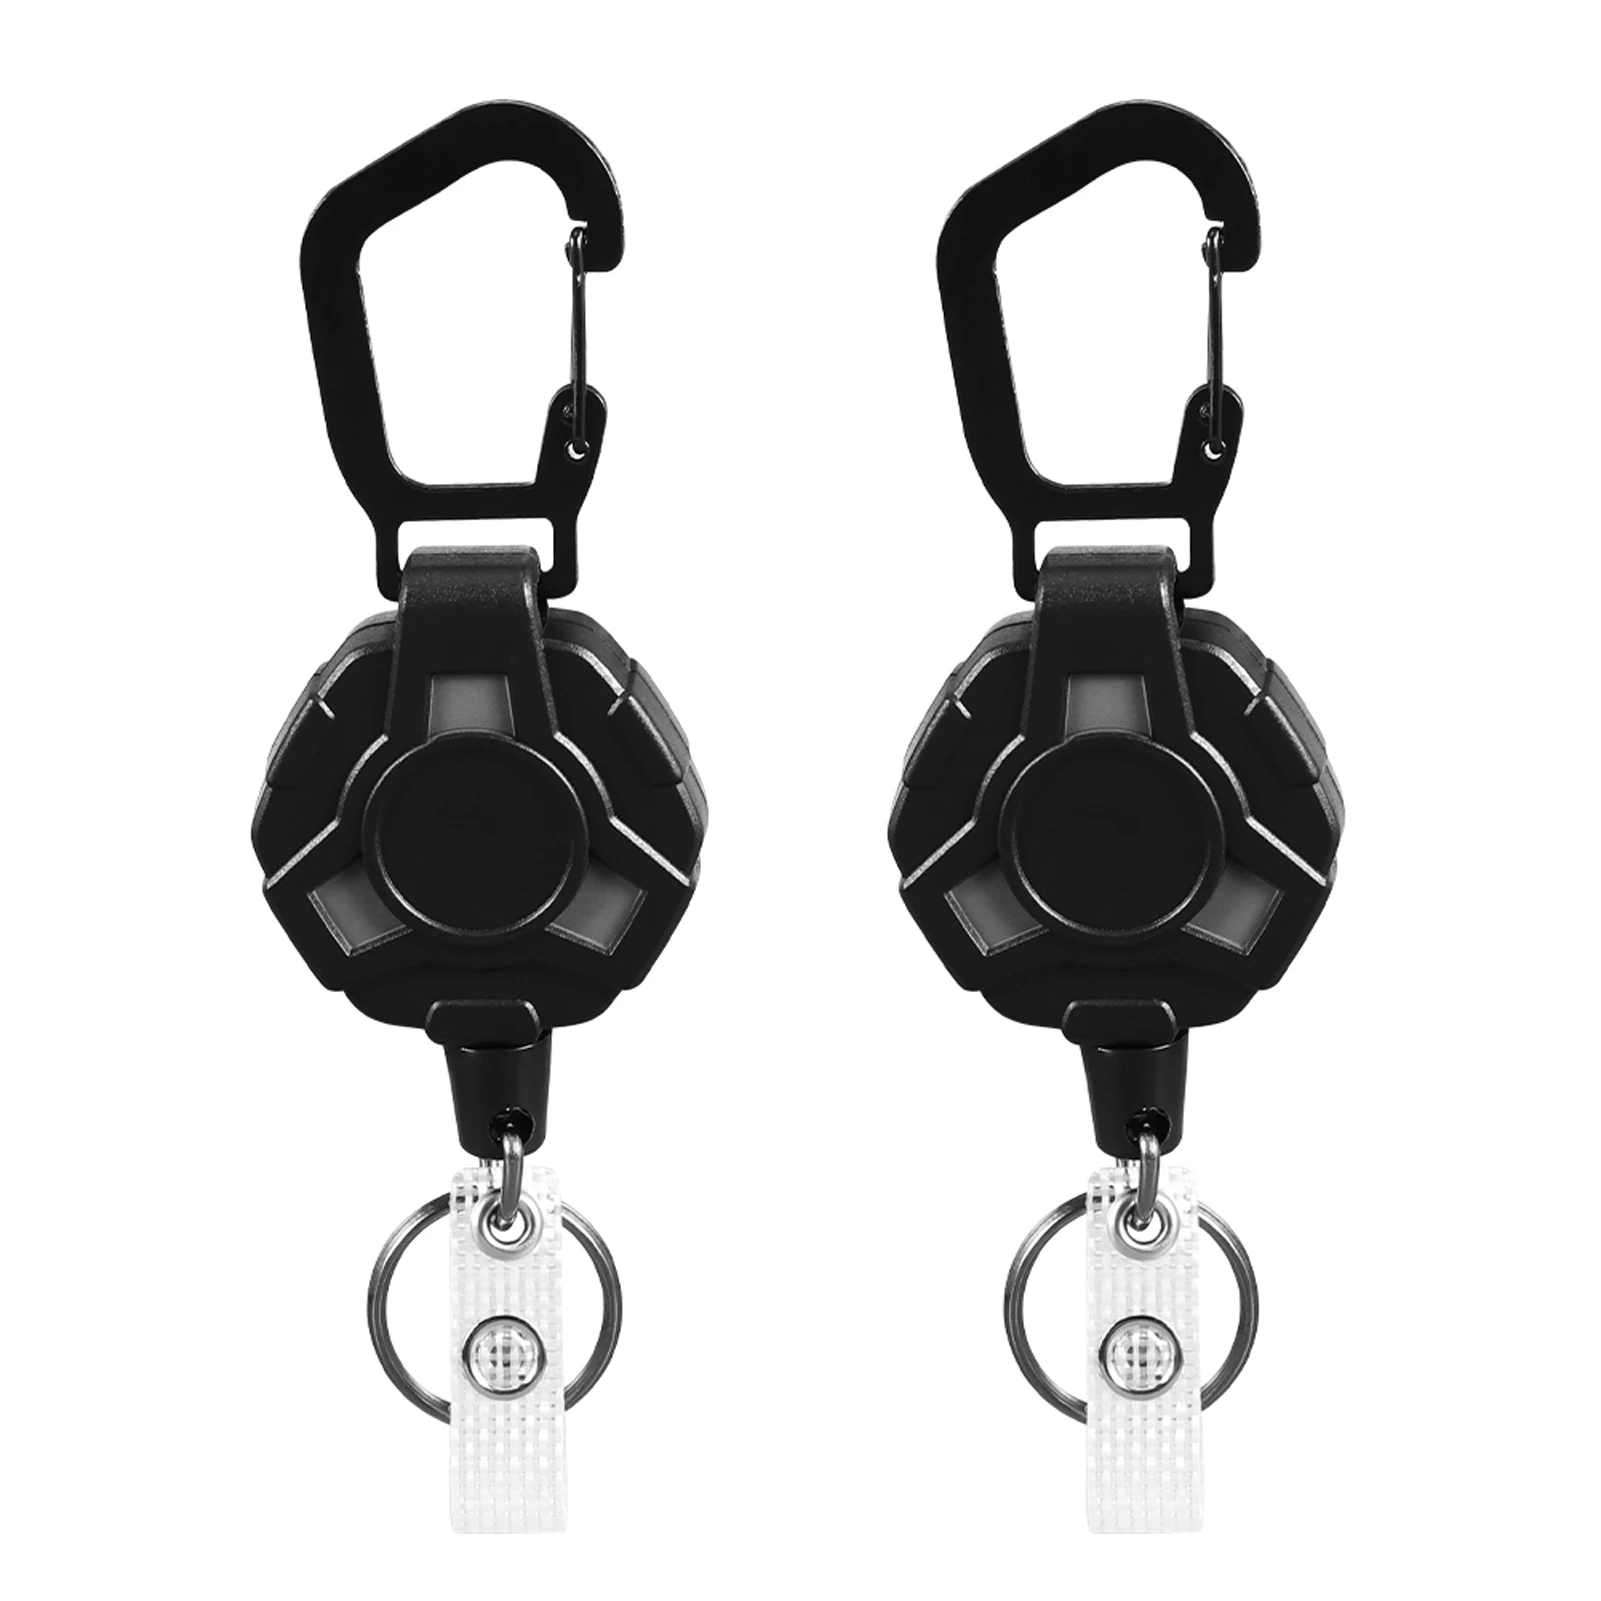 

2pcs Steel Cord Flashlight Multifunctional Anti Lost Belt Heavy Duty With ID Holder Retractable Keychain Extendable Badge Reel